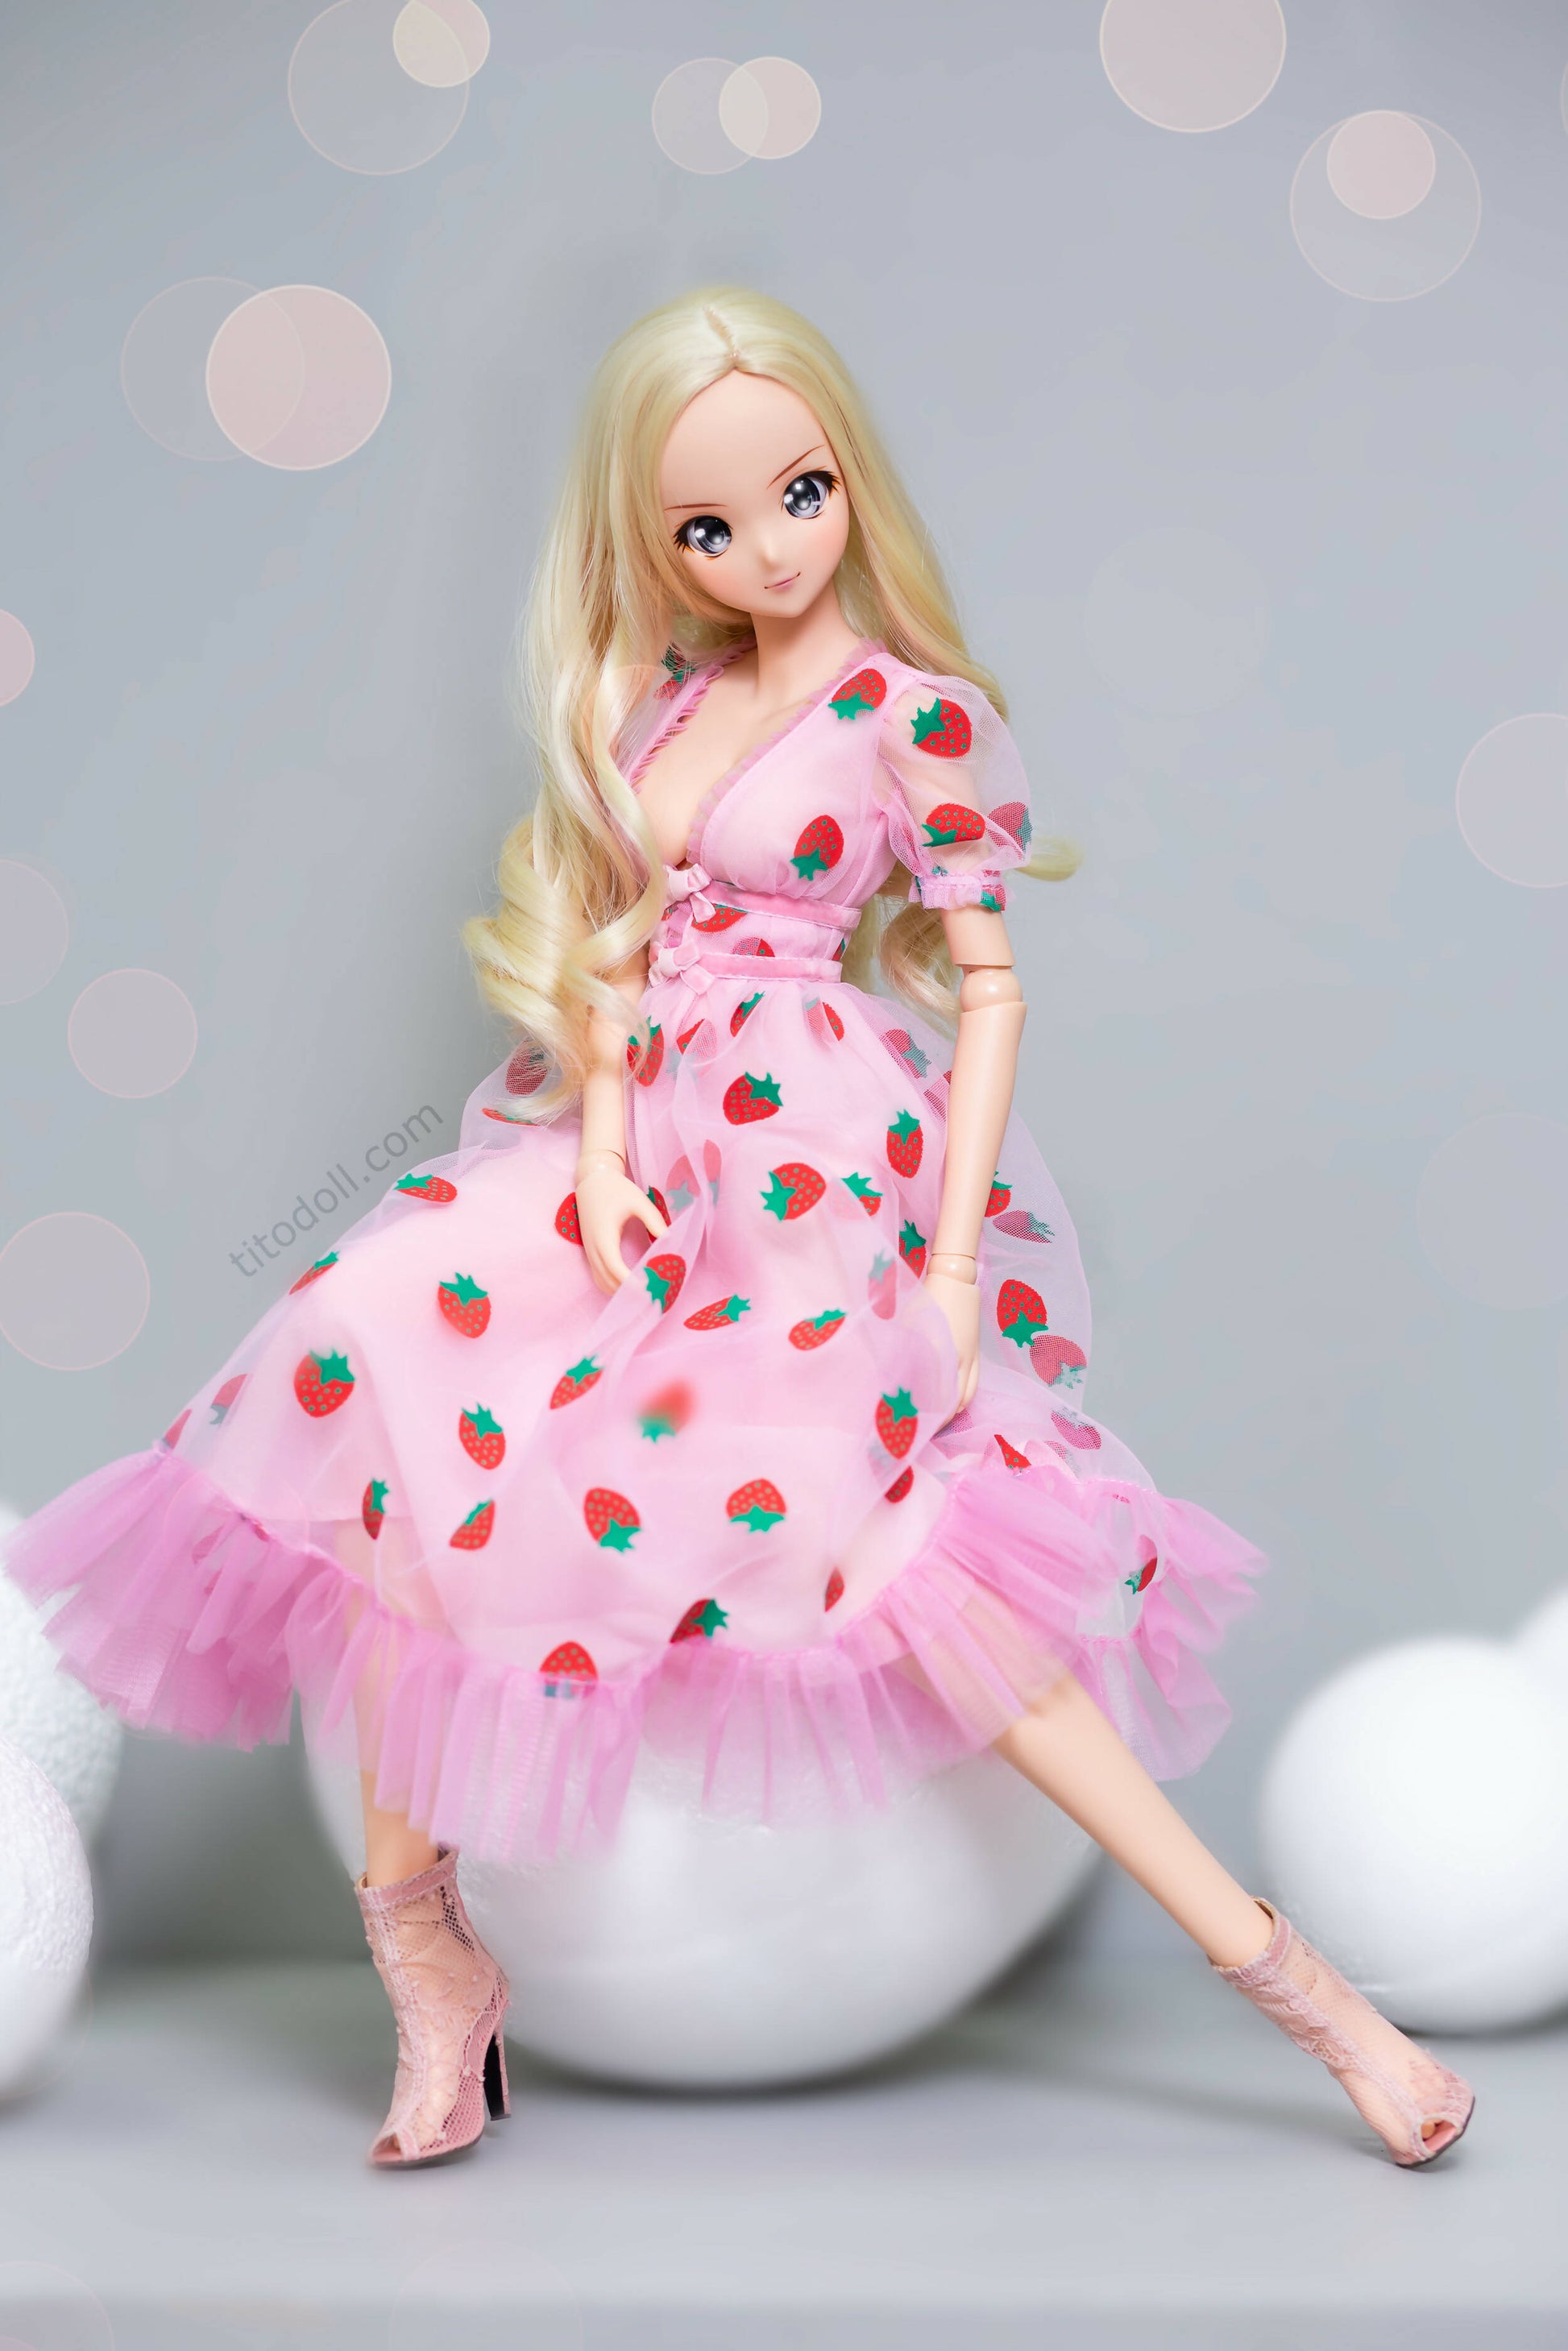 Barbie Clothes Strawberry Checked Outfits and 2 Accessories for Barbie Doll